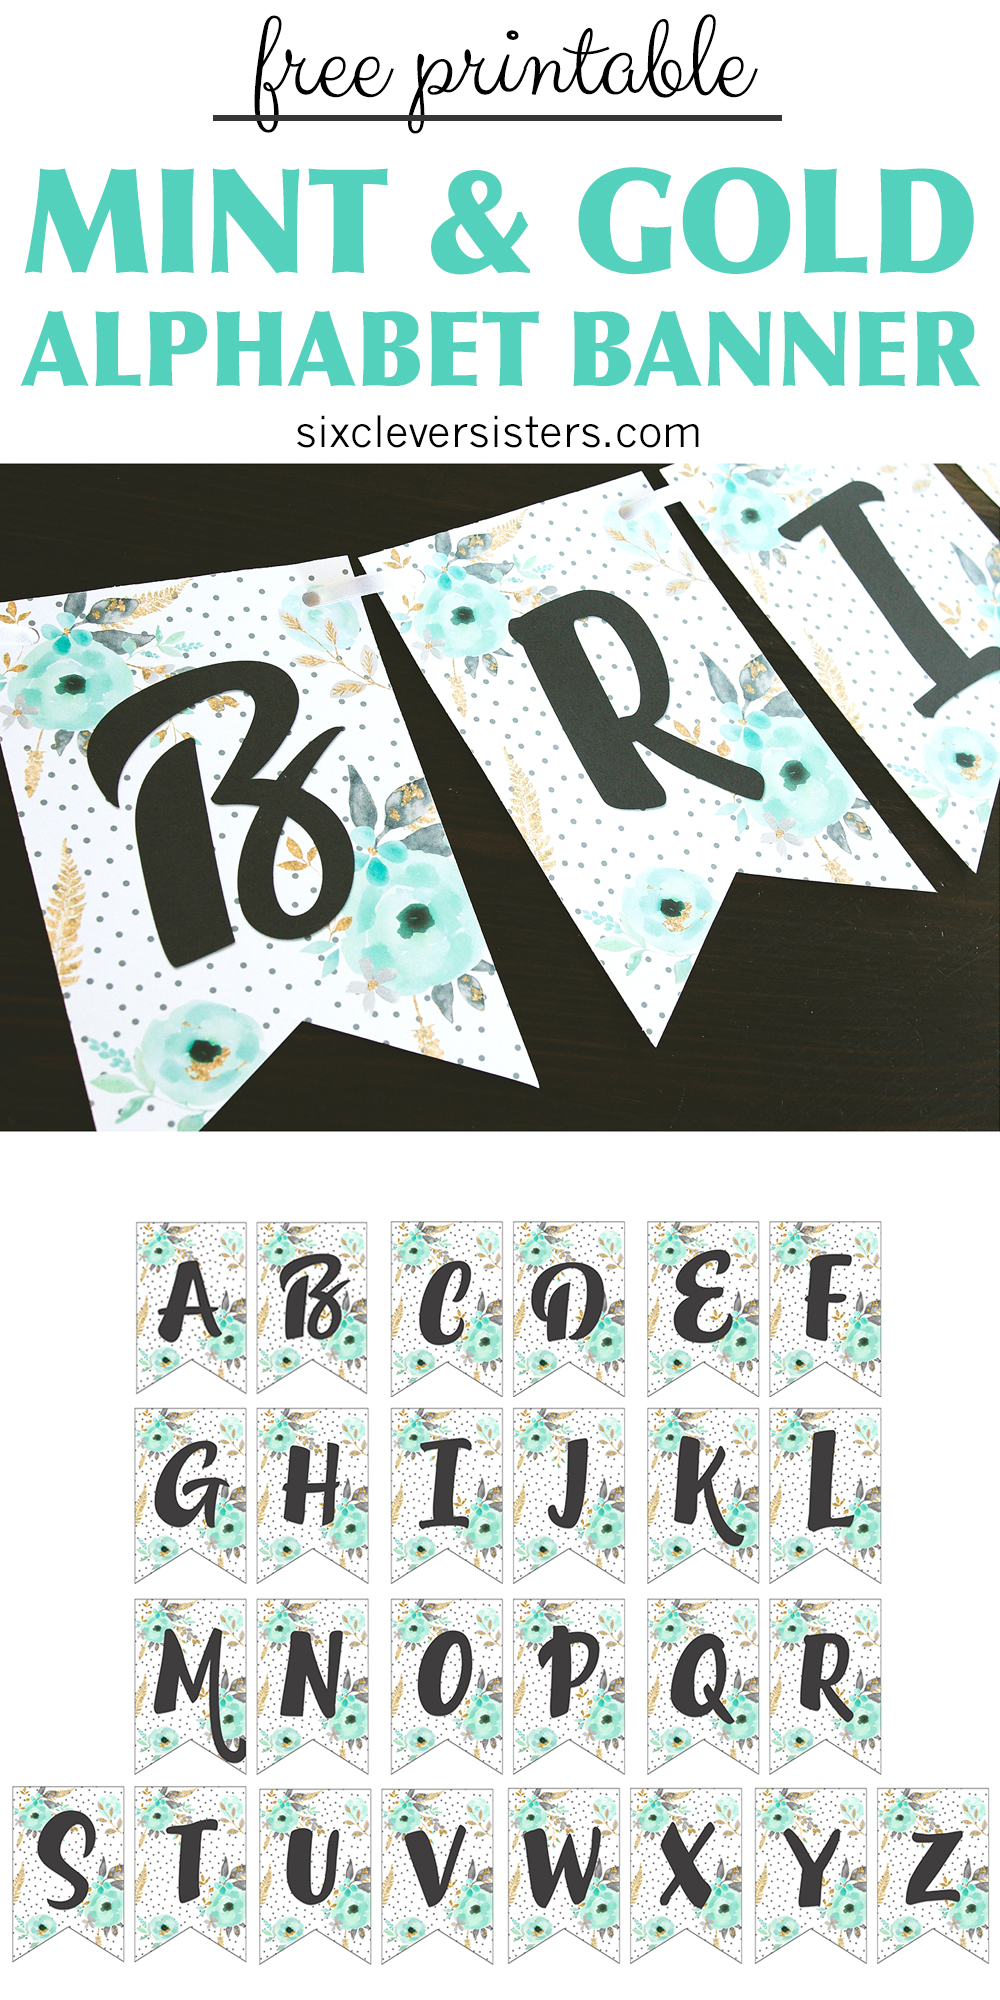 free-printable-alphabet-banner-mint-gold-six-clever-sisters